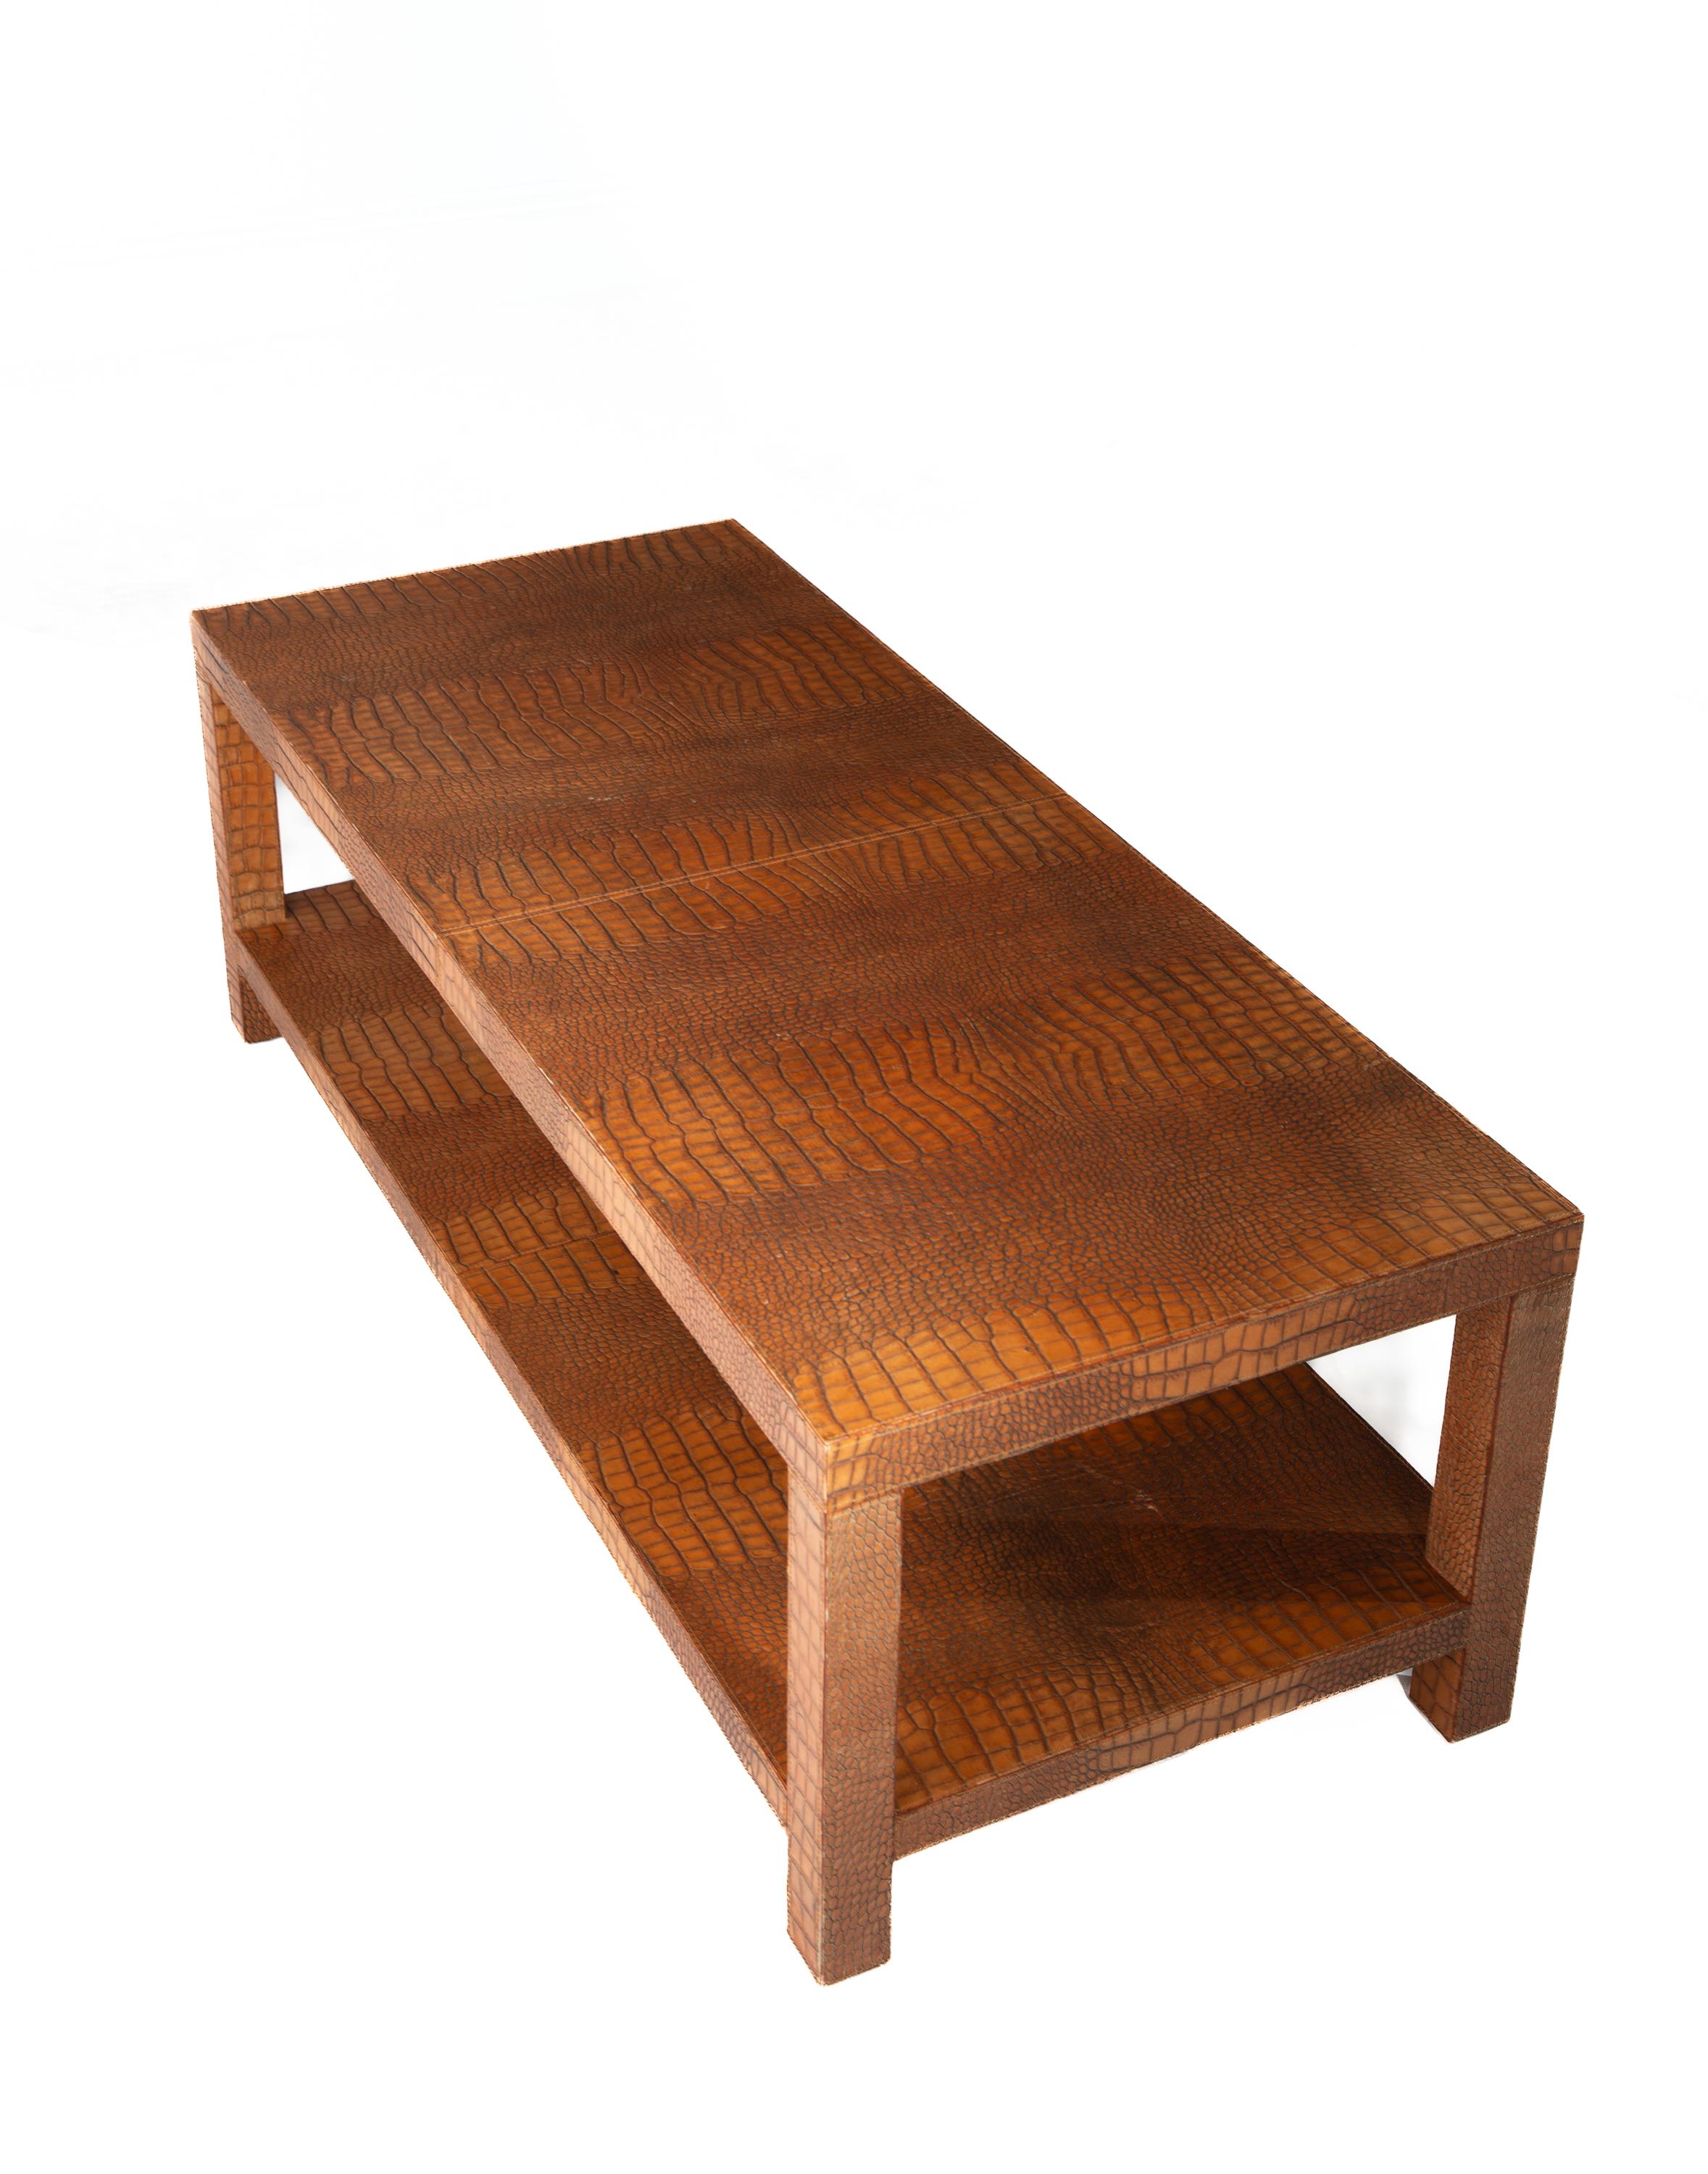 20th Century Faux Croc Cheslea Coffee Table by Mrs. MacDougall for Hinson & Co For Sale